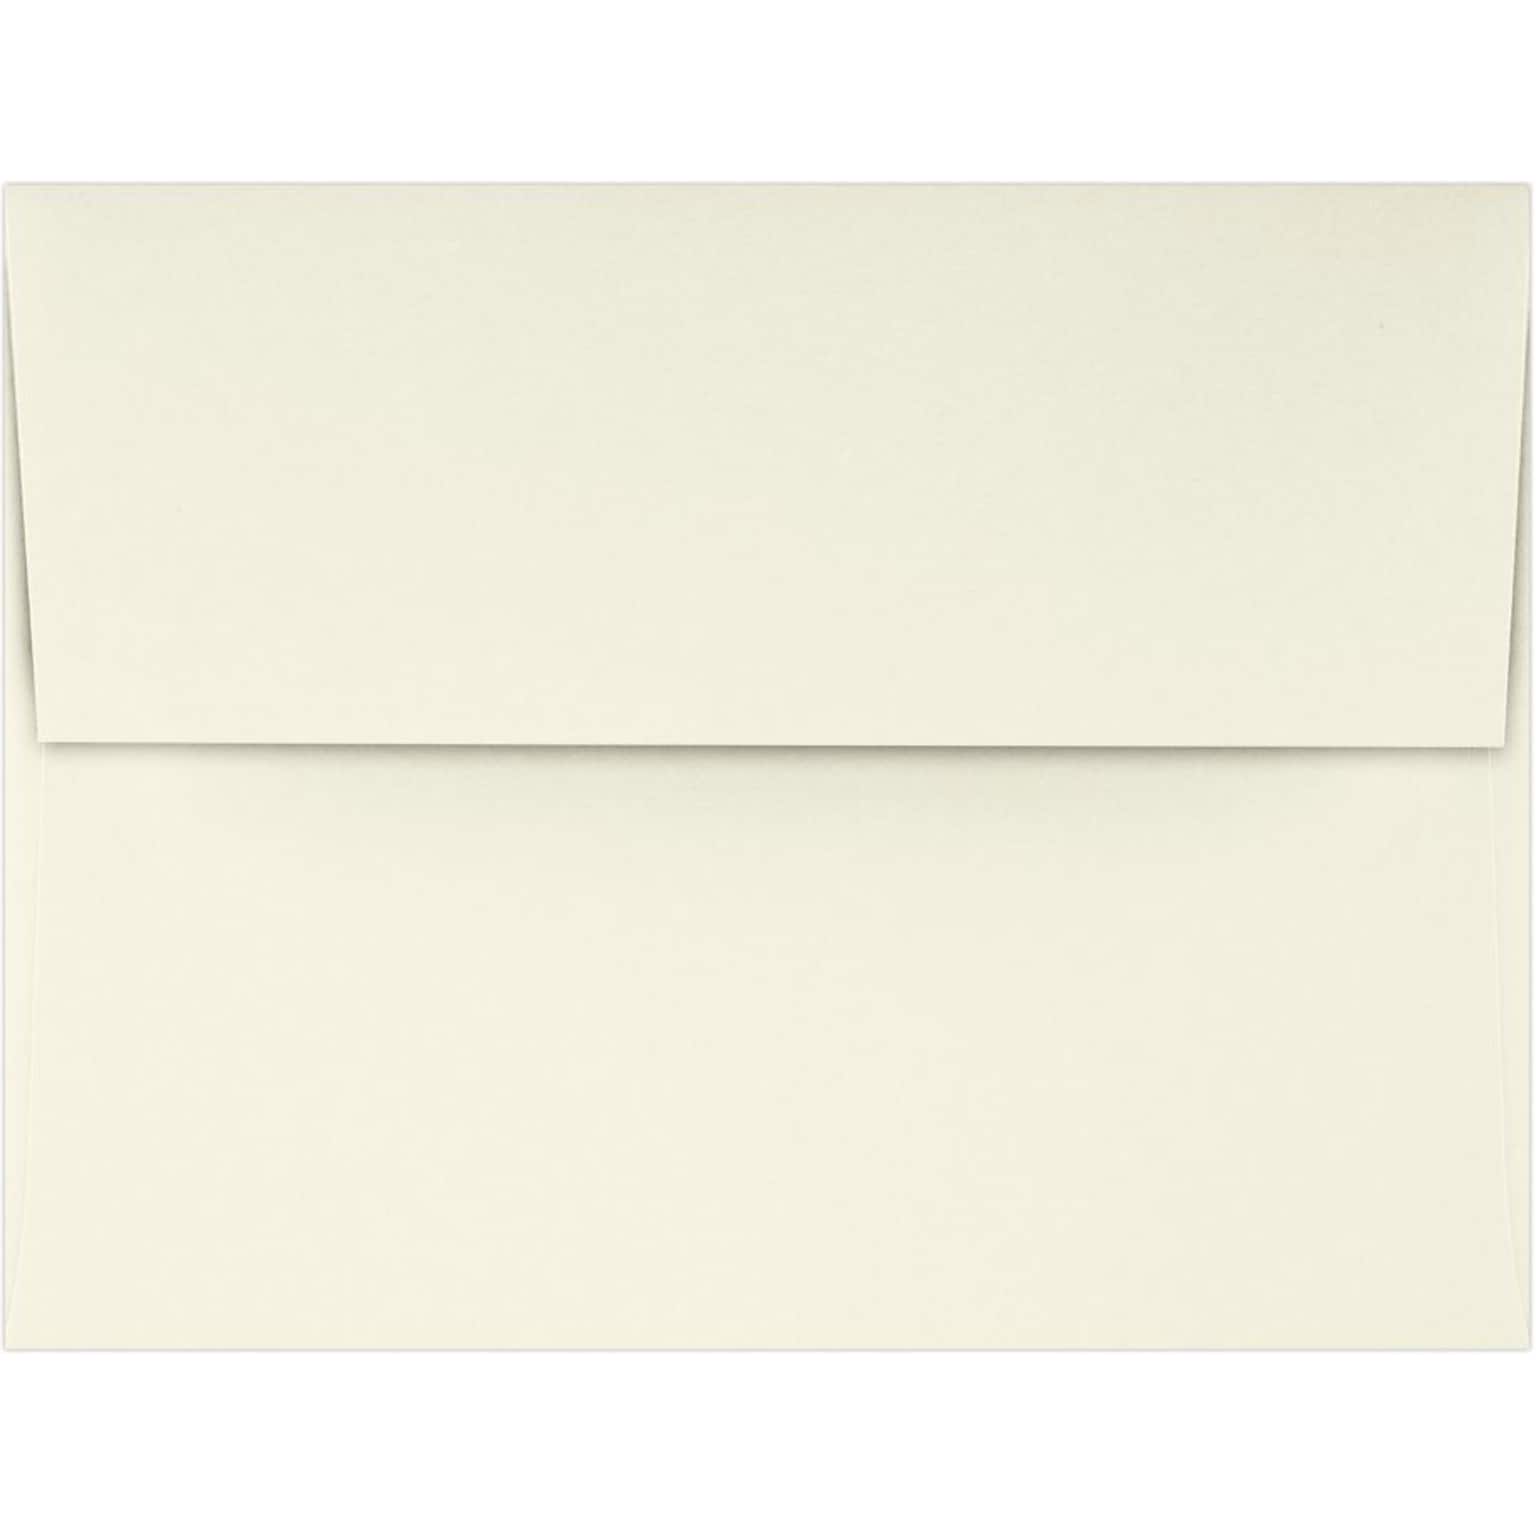 LUX A2 Invitation Envelopes (4 3/8 x 5 3/4) 500/Pack, 70lb. Classic Crest® Natural White (4870-70NW-500)